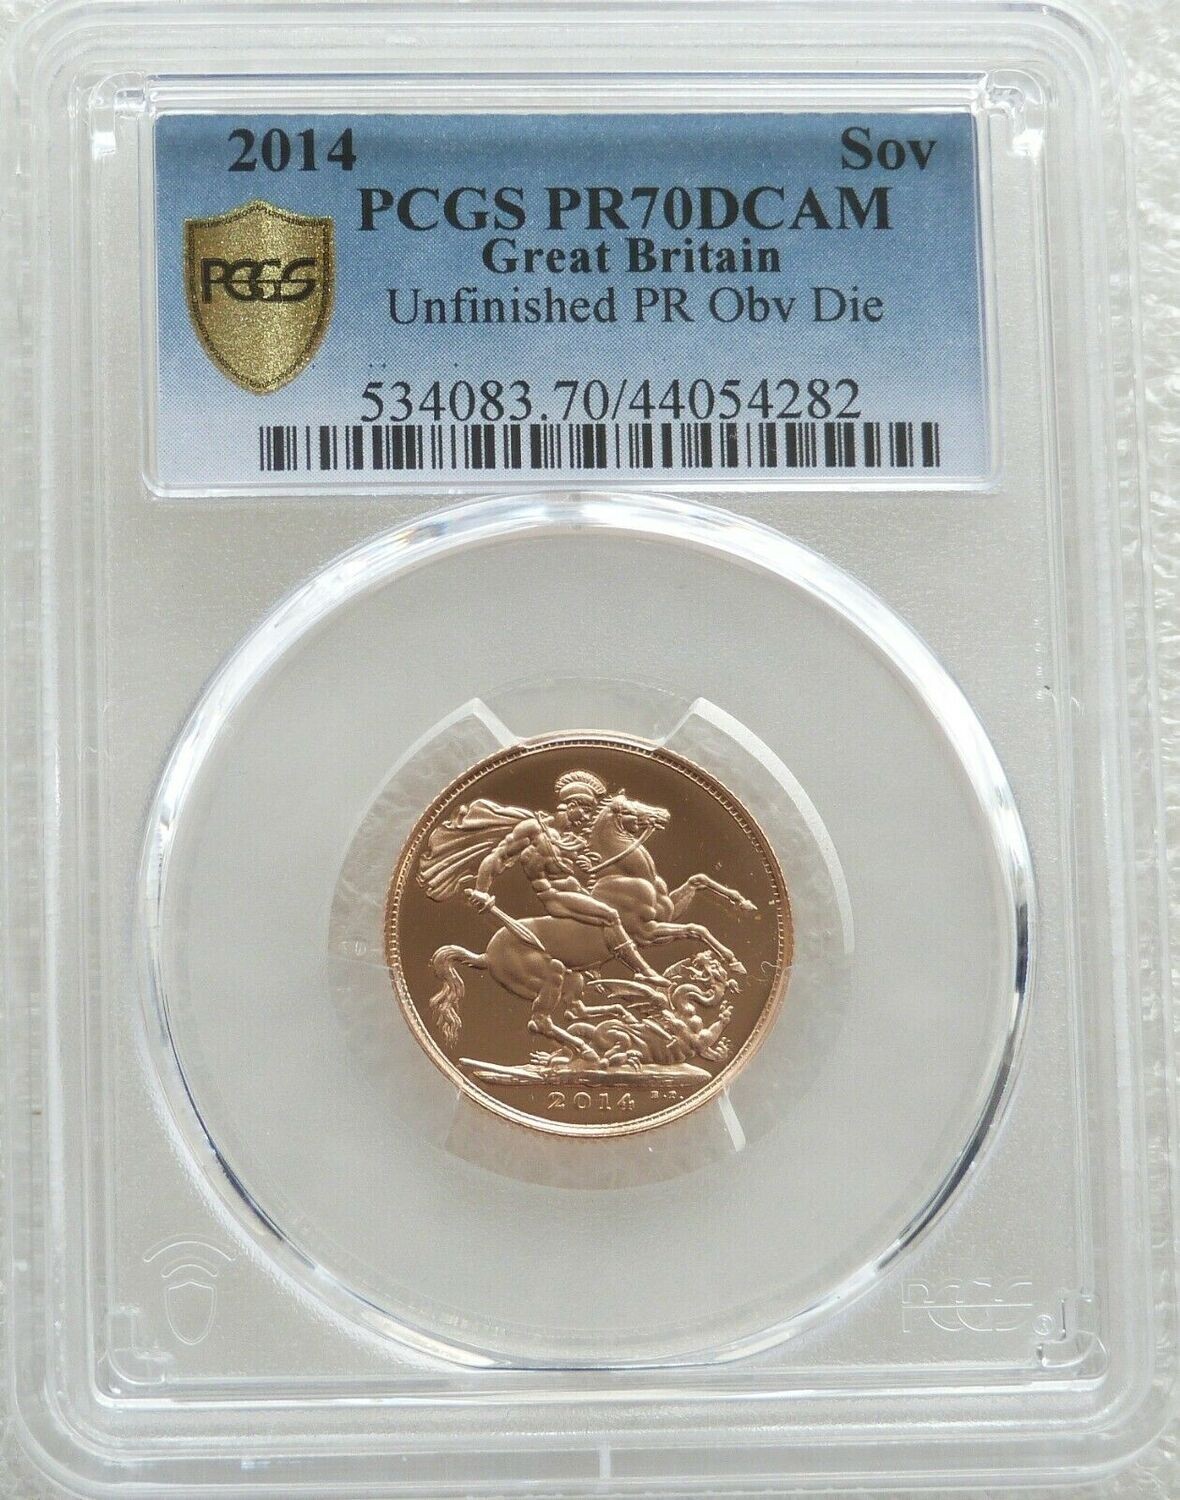 2014 St George and the Dragon Full Sovereign Gold Proof Coin PCGS PR70 DCAM Mint Error Mule